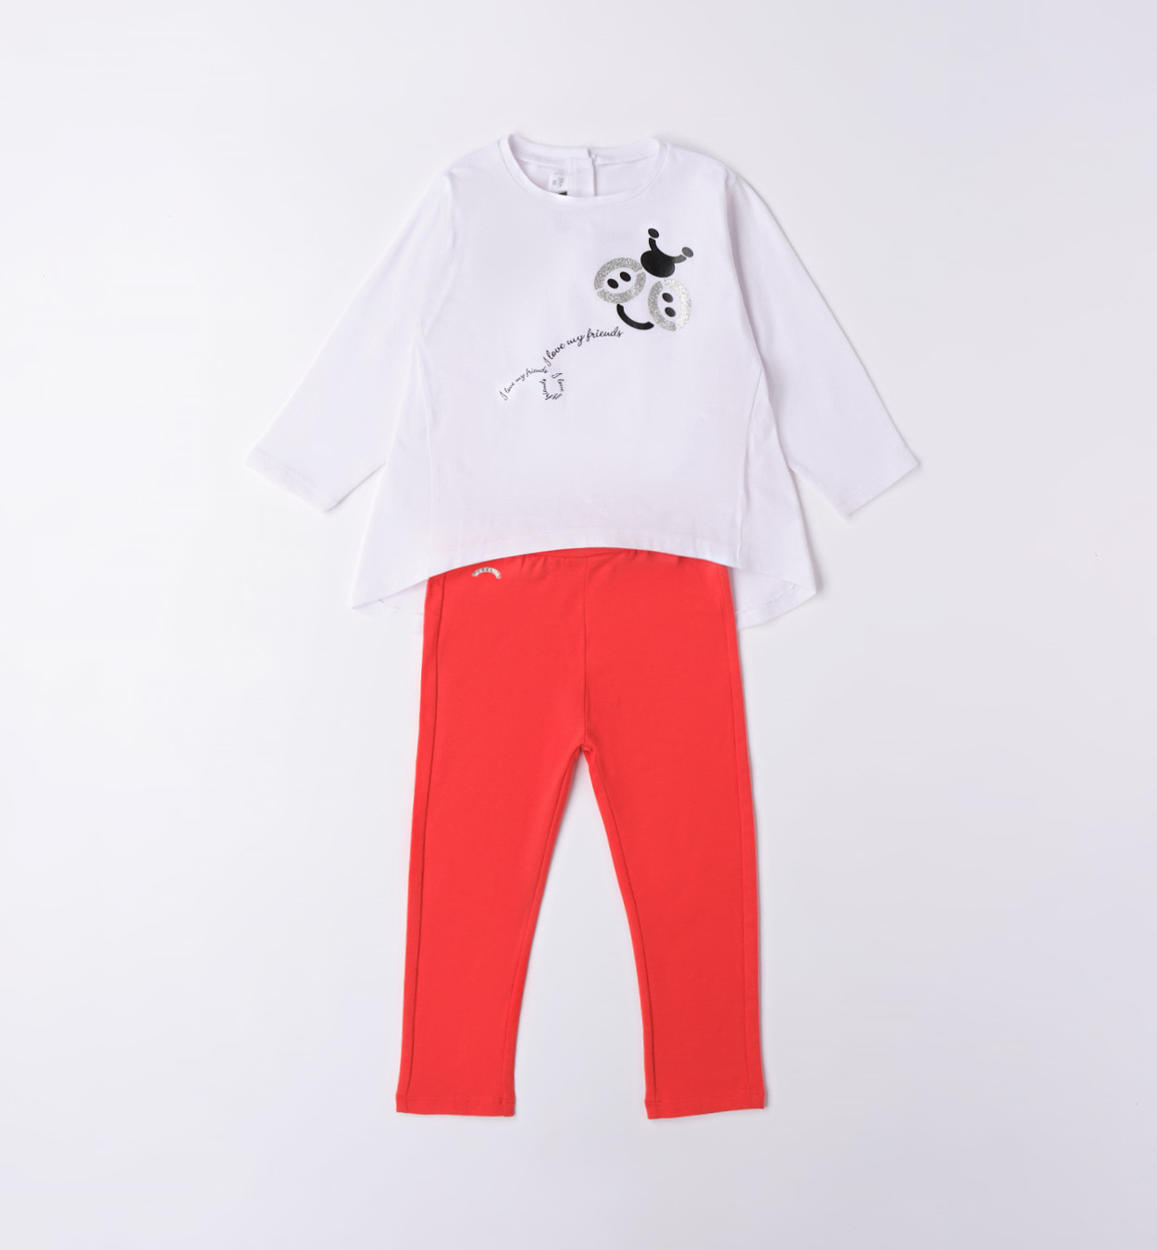 Girl's stretch cotton outfit - Sarabanda